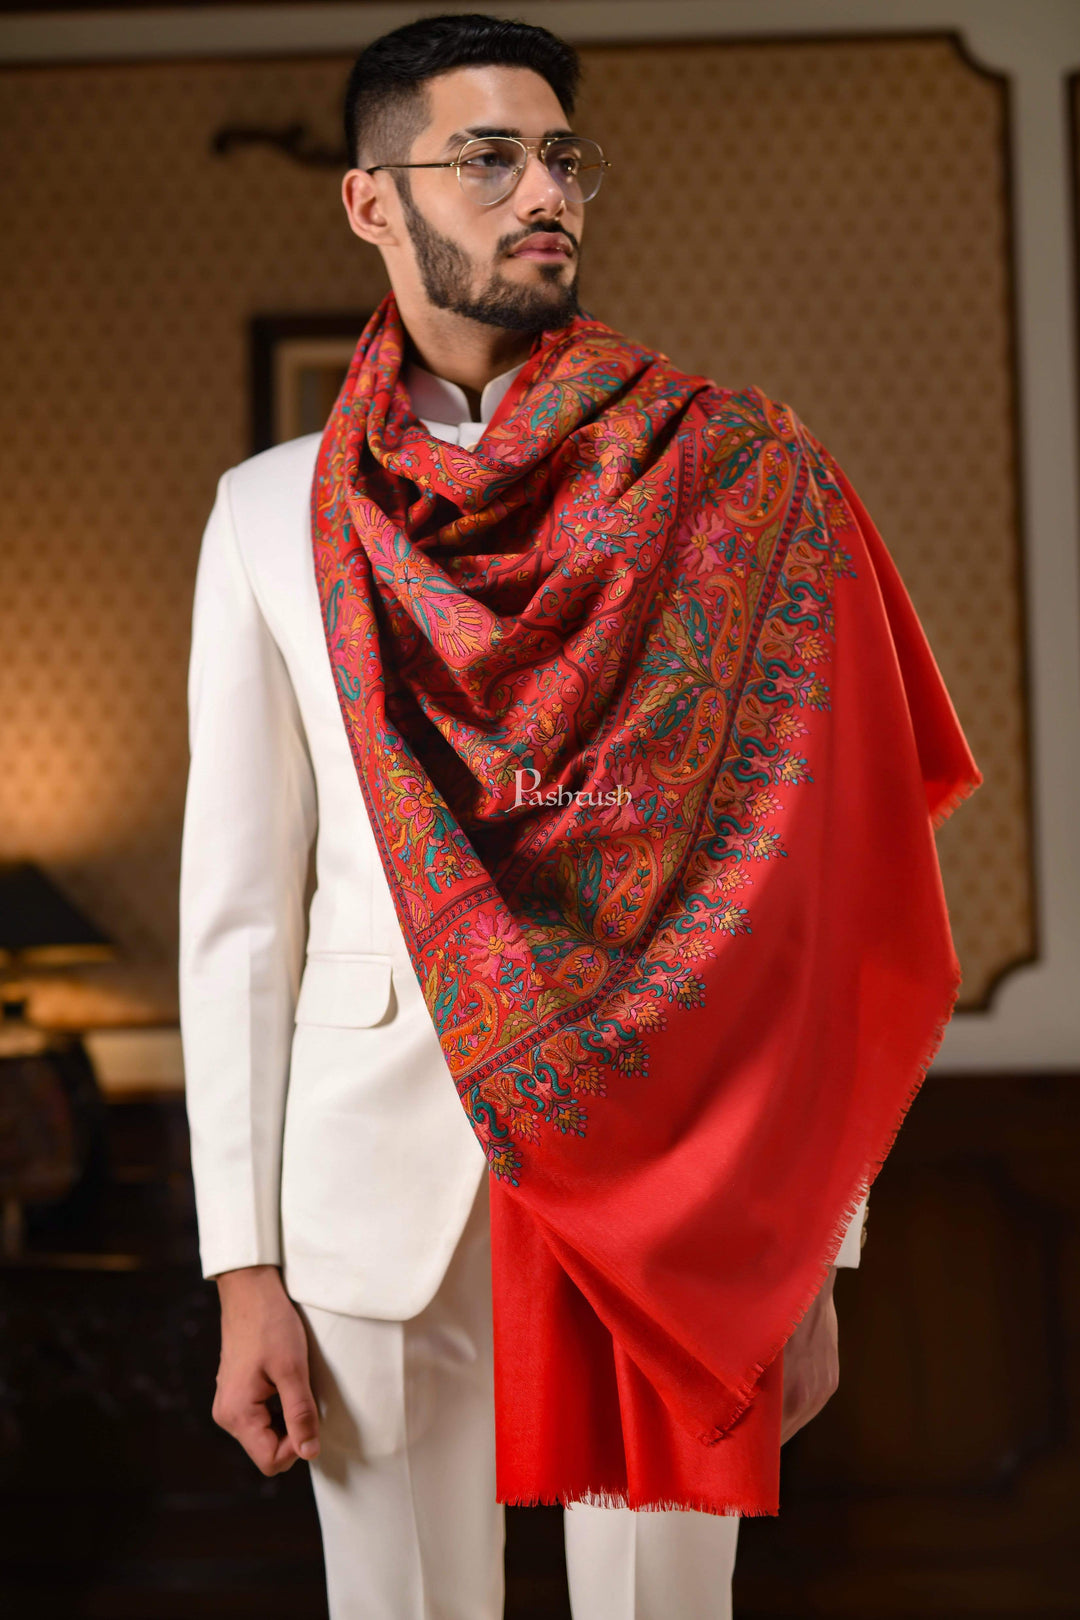 Pashtush India 100x200 Pashtush Mens Papier-mâché Embroidered Shawl, Fine Wool with Silky Embroidery, Maroon